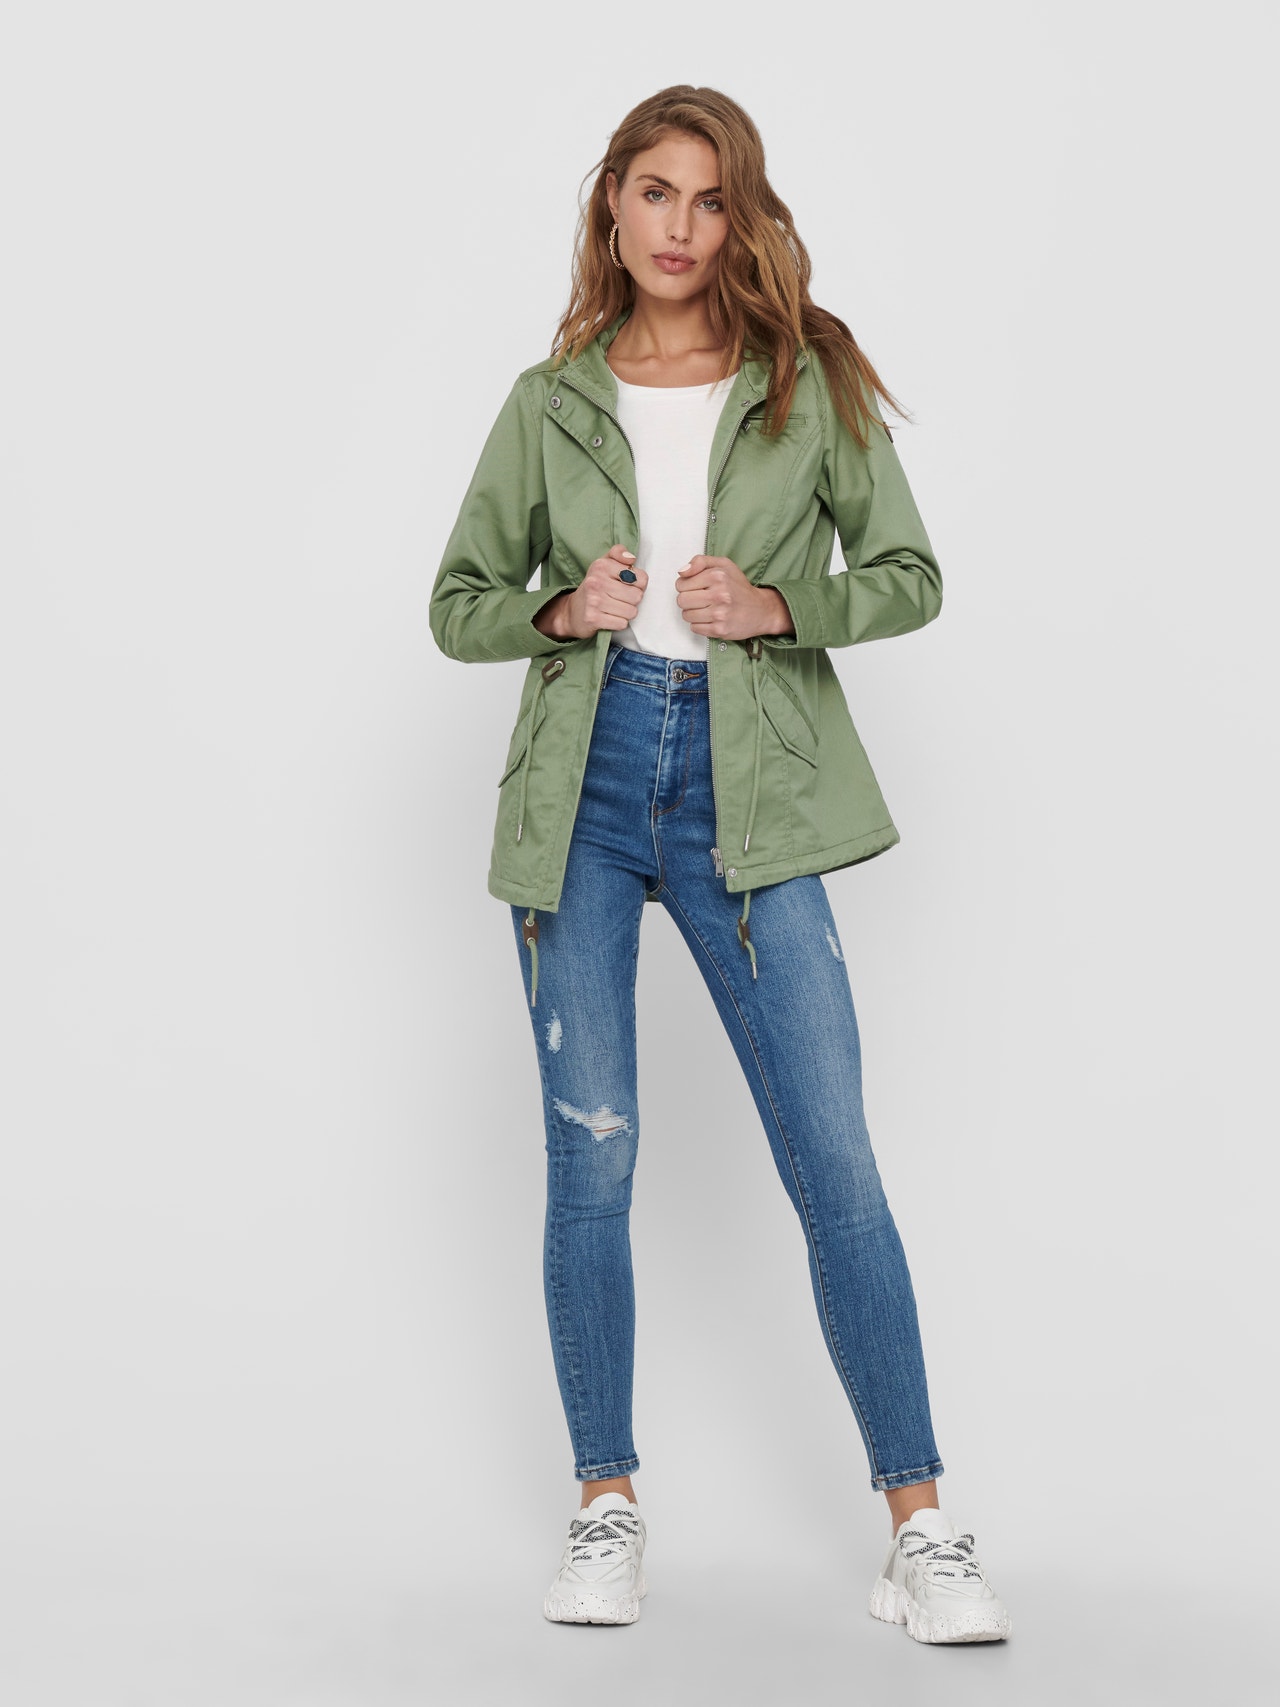 ONLY Hood Jacket -Hedge Green - 15216452